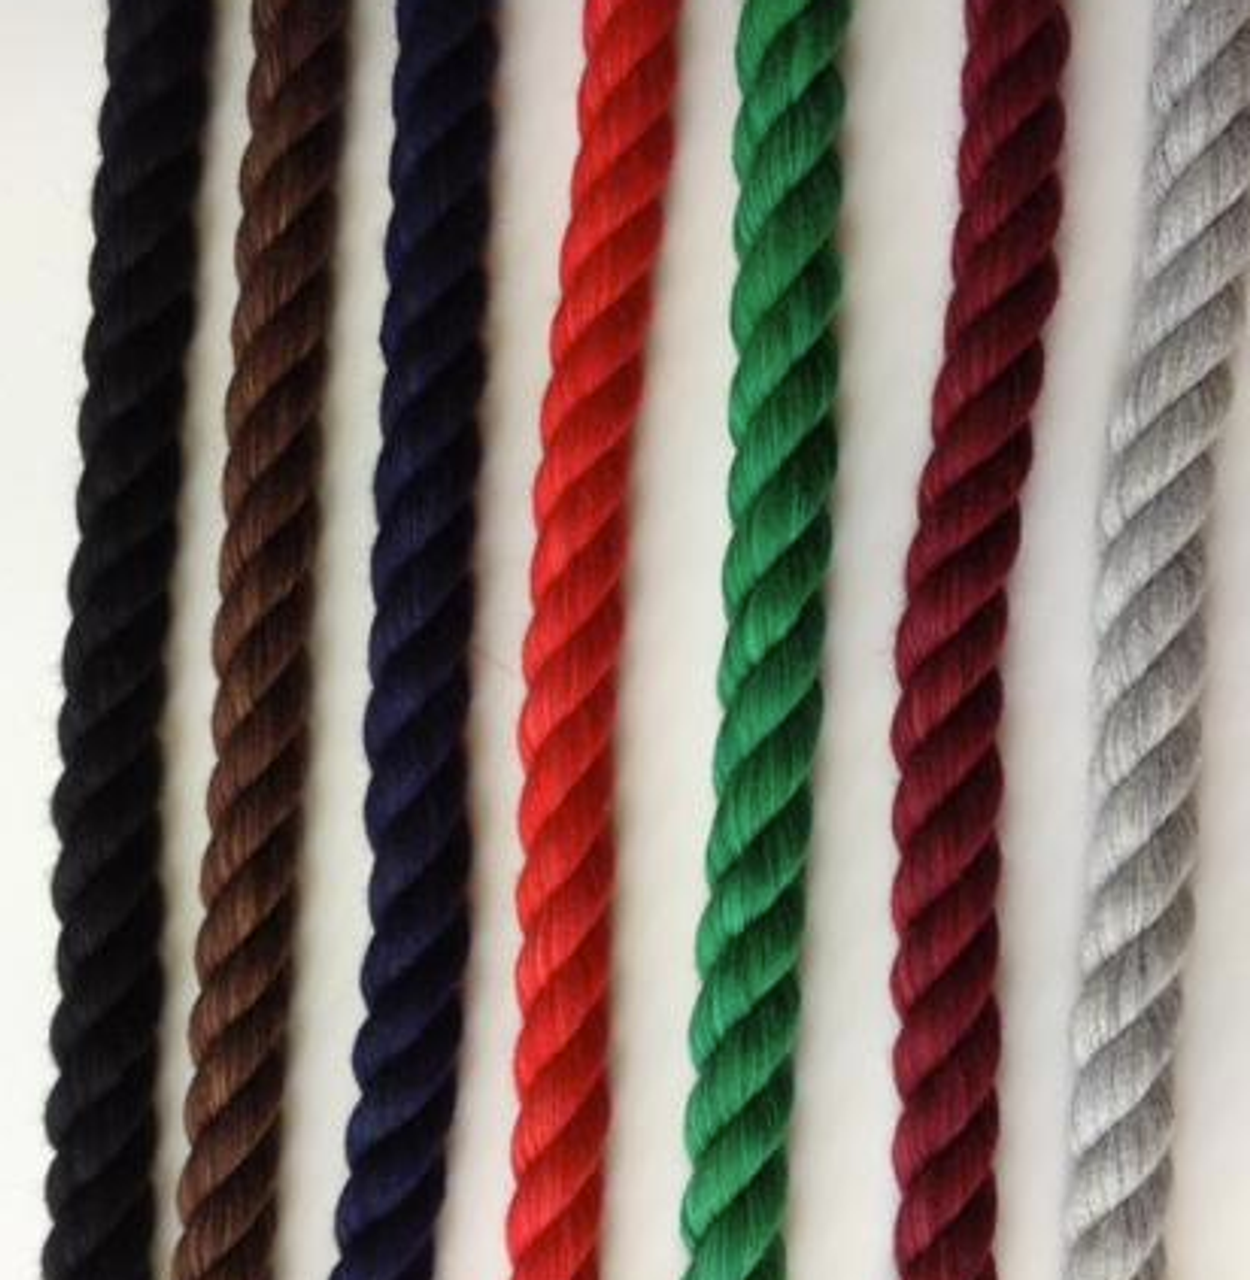 Super Soft 3 Strand Twisted Cotton Rope (Black, 1/2 Inch x 10 Feet)